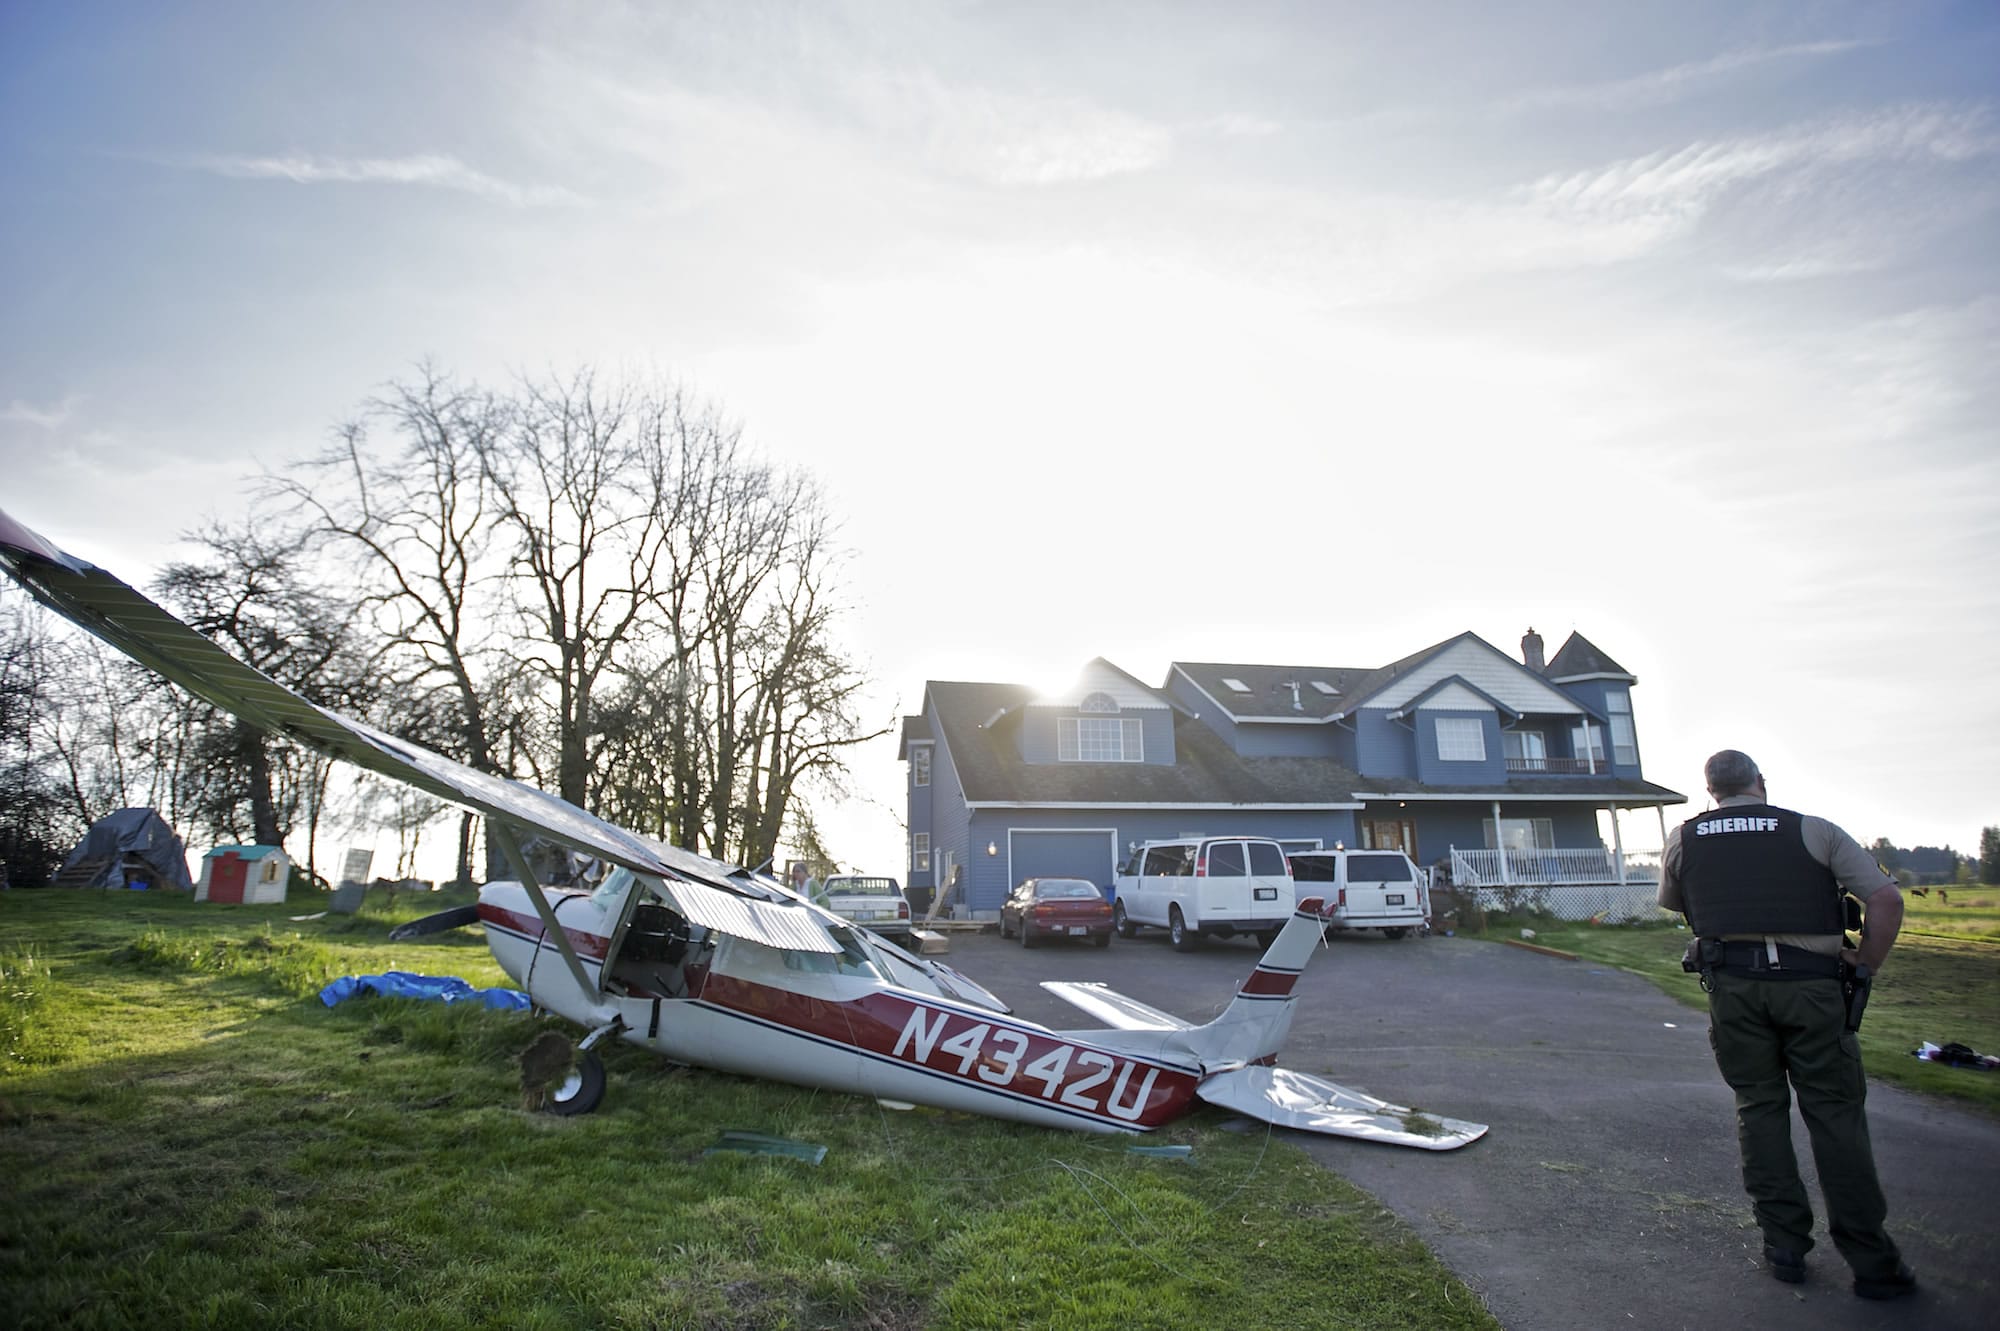 A Cessna 150 sits near the Brush Prairie home of Mark and Angela Congdon, where it crashed while trying to land at Brush Prairie Aerodrome about 5:15 p.m.